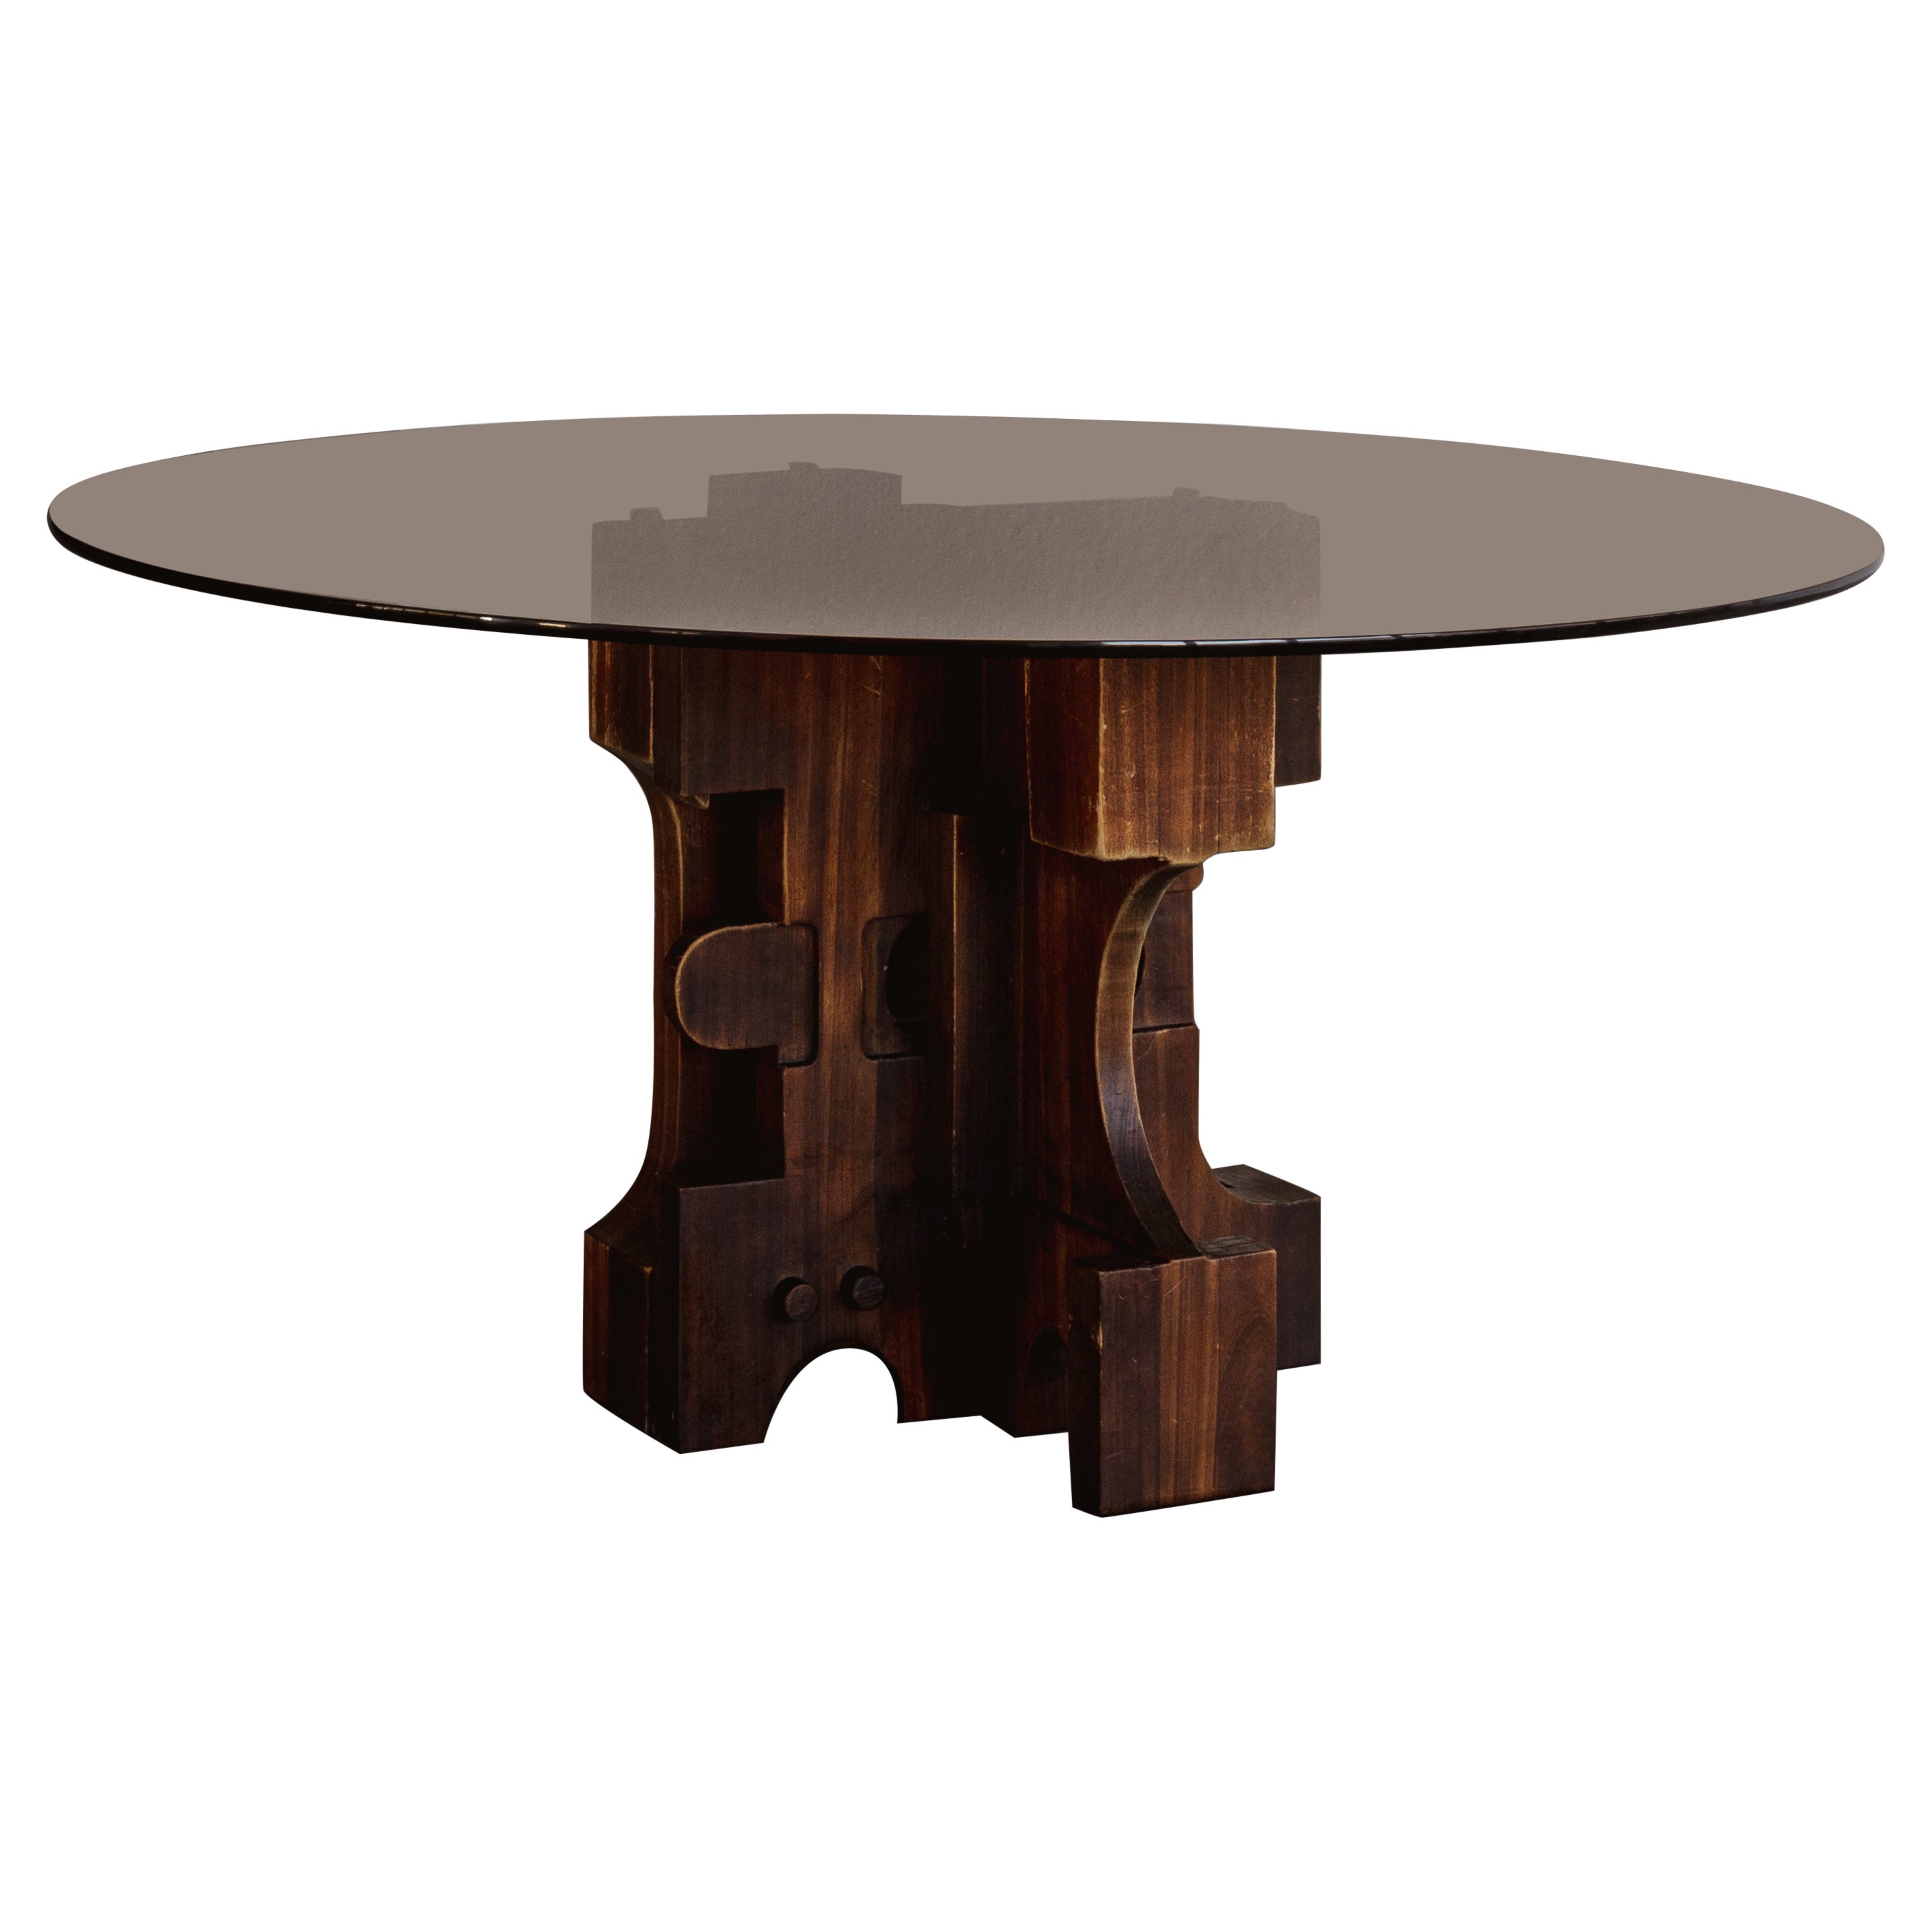 Nerone & Patuzzi Dining Table for Gruppo NP2, 1970s